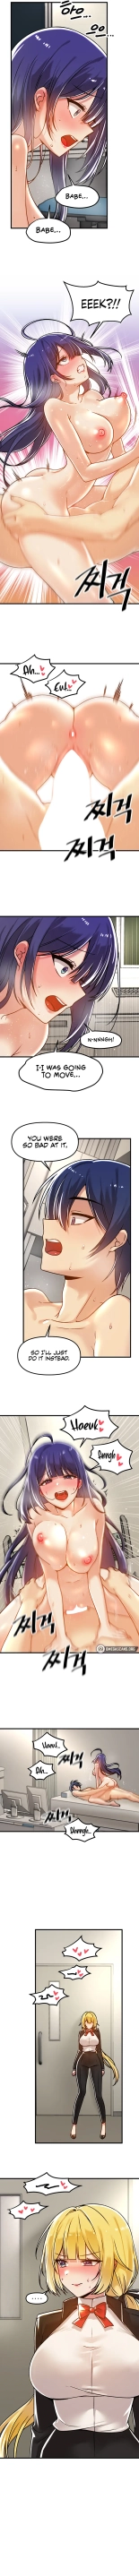 Trapped in the Academy's Eroge : page 456